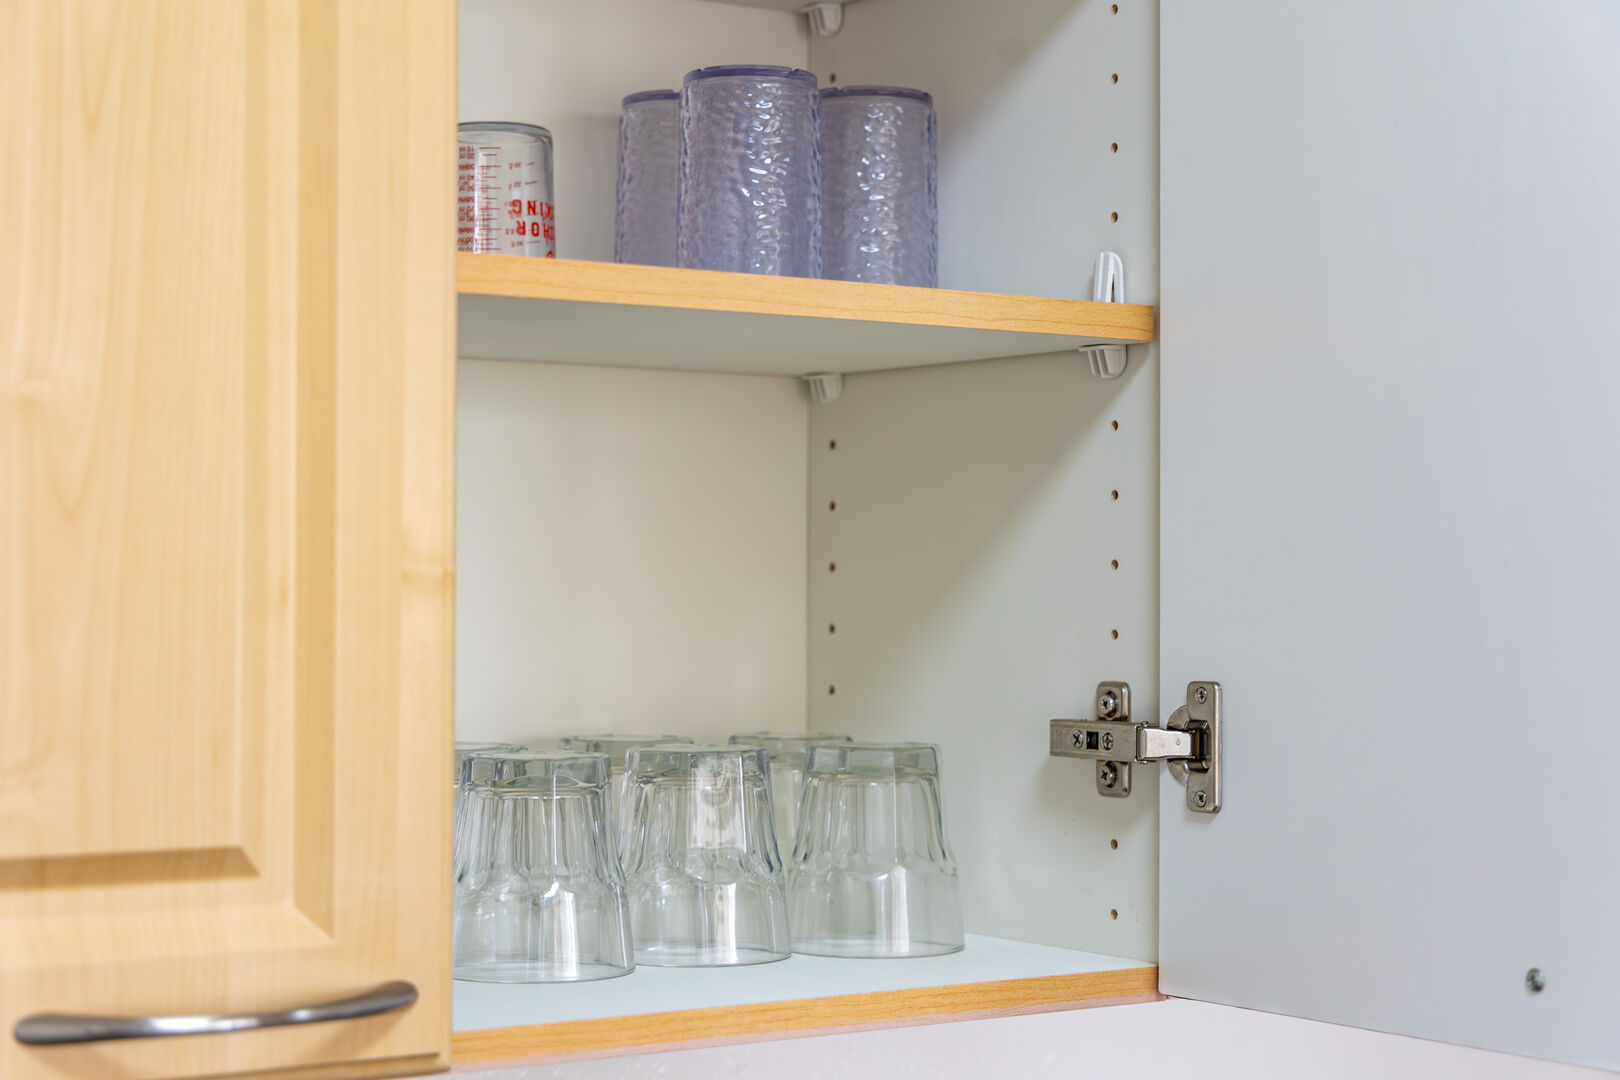 Glasses are also in the cabinet.